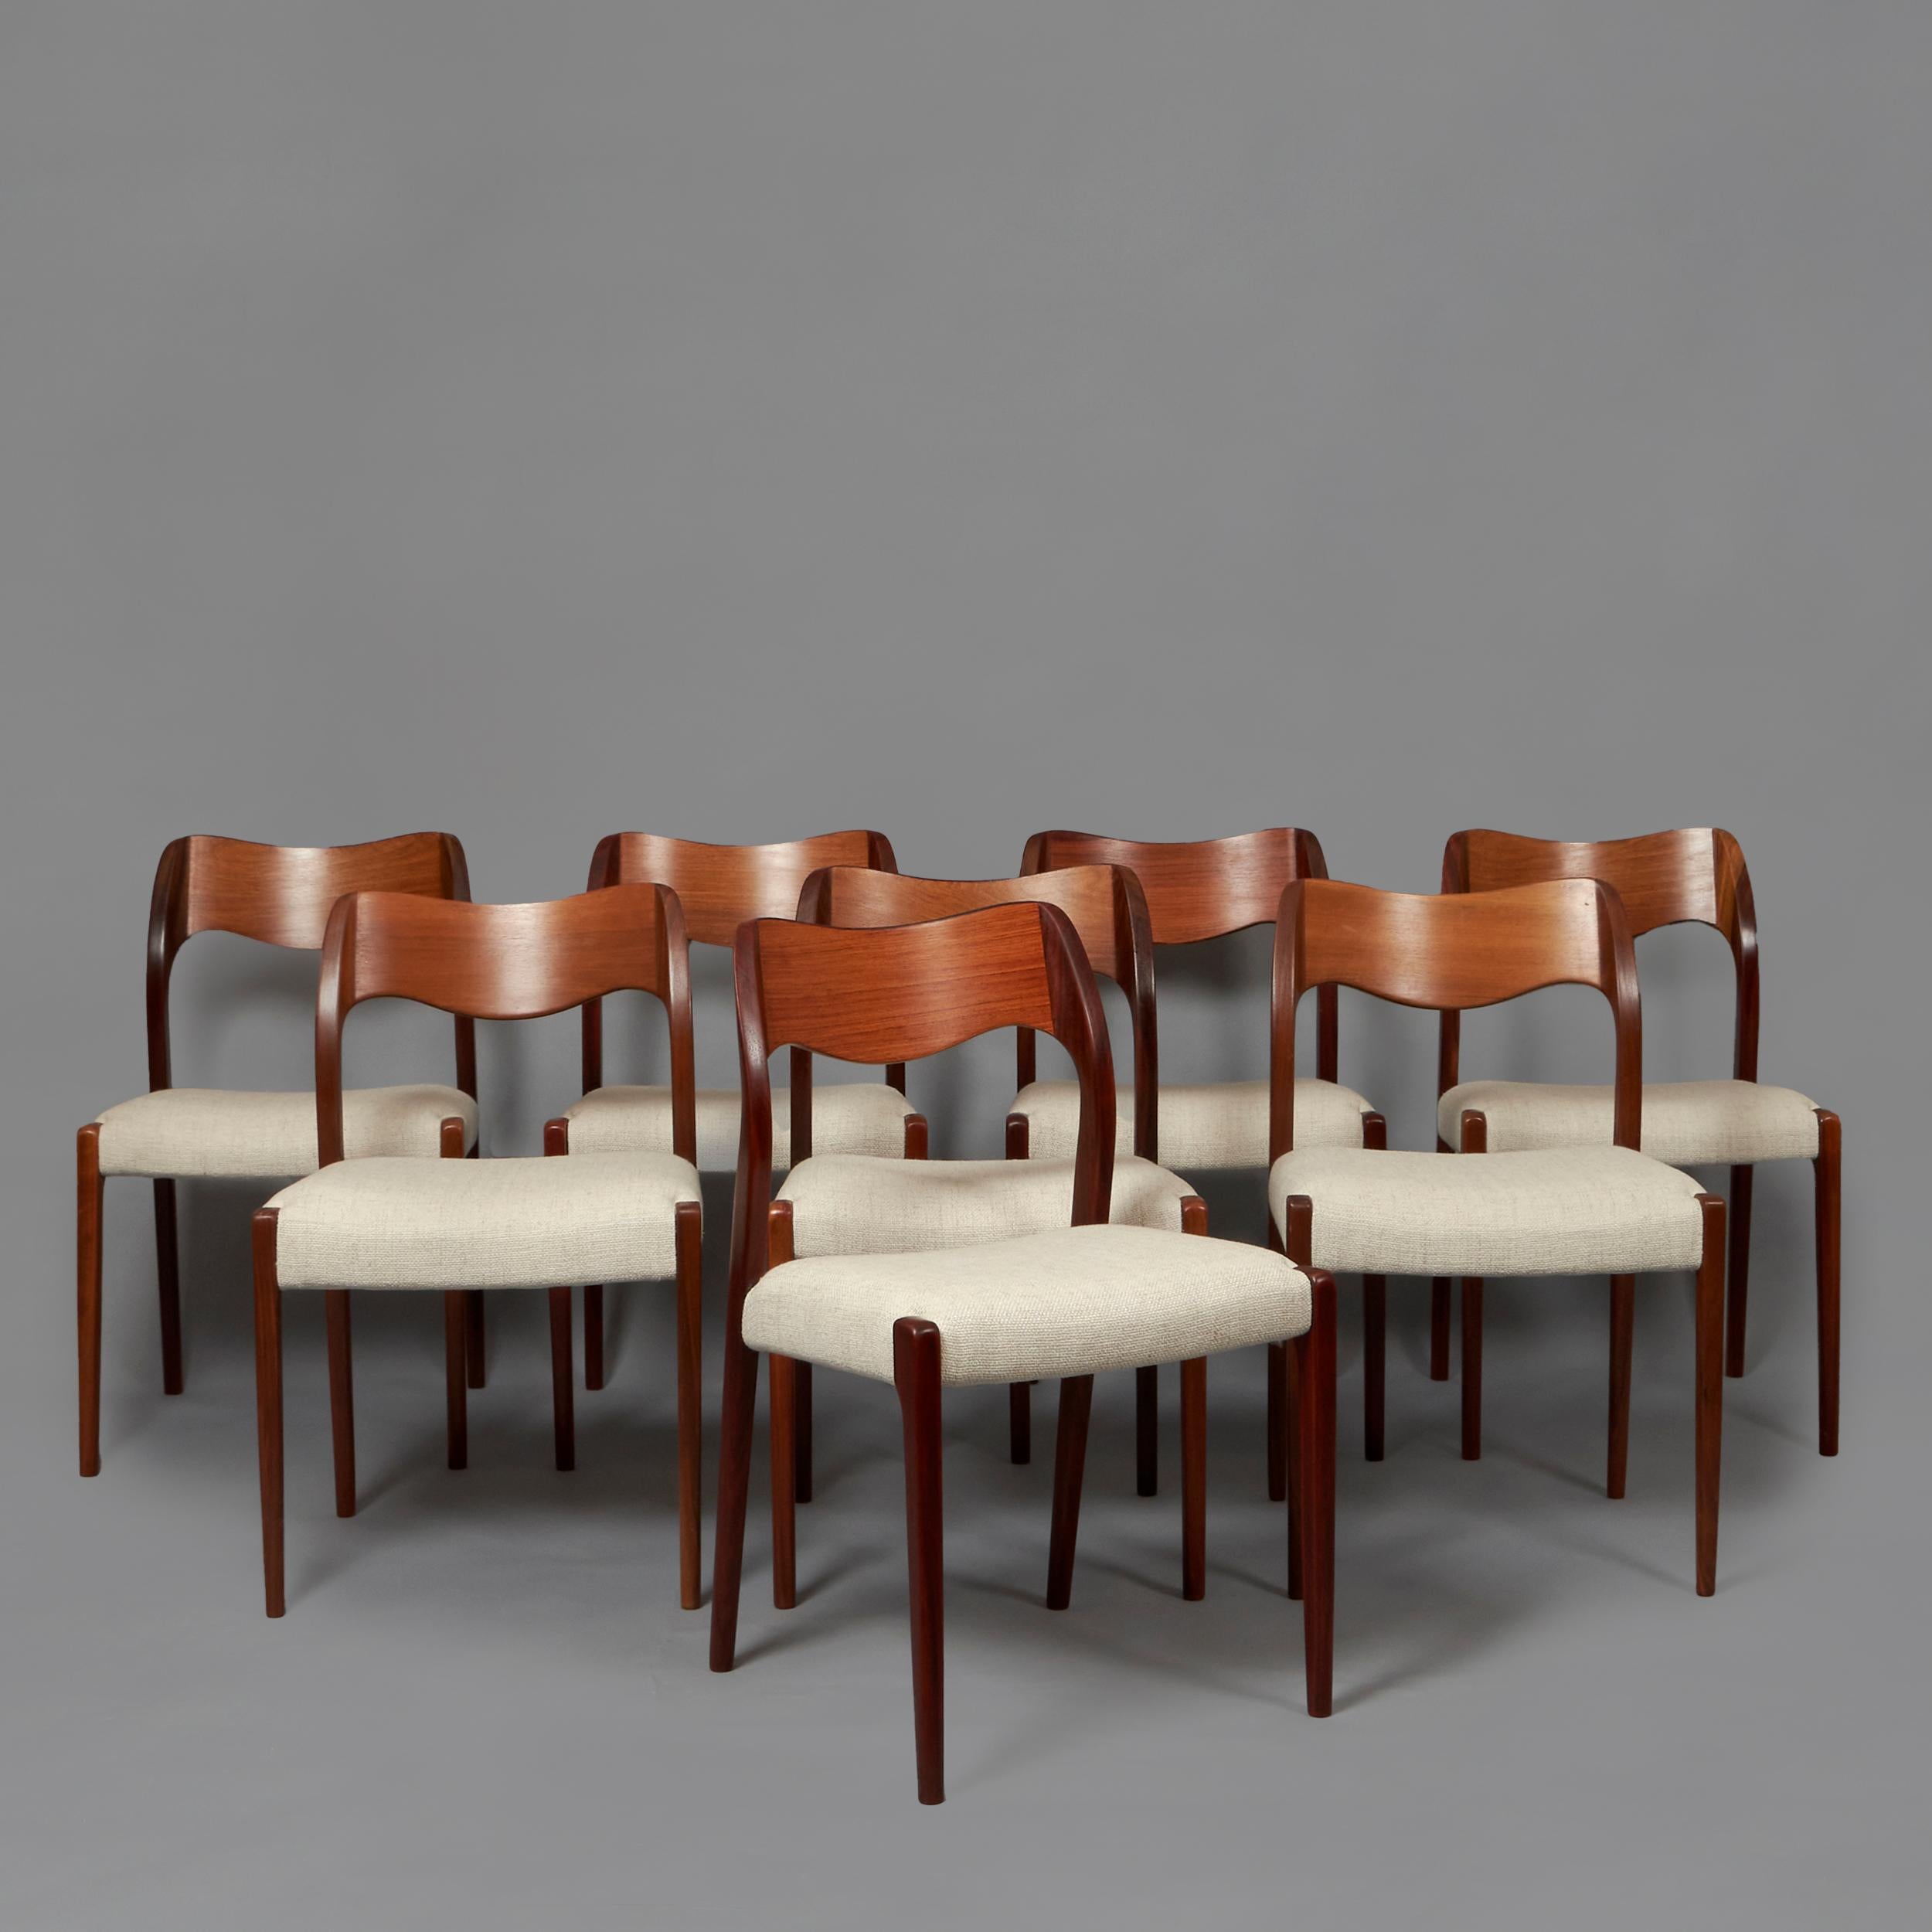 Eight Dining room chairs model ‘’71’’ designed by Niels Otto moller for JL Möllers Möbelfabrik. Upholstery and Rosewood. Denmark, 1960’s 
Aproximate dimensions: 19,29 in. Width, 31,49 Height, Seat height 19,29 in.
Two of them are slightly smaller,